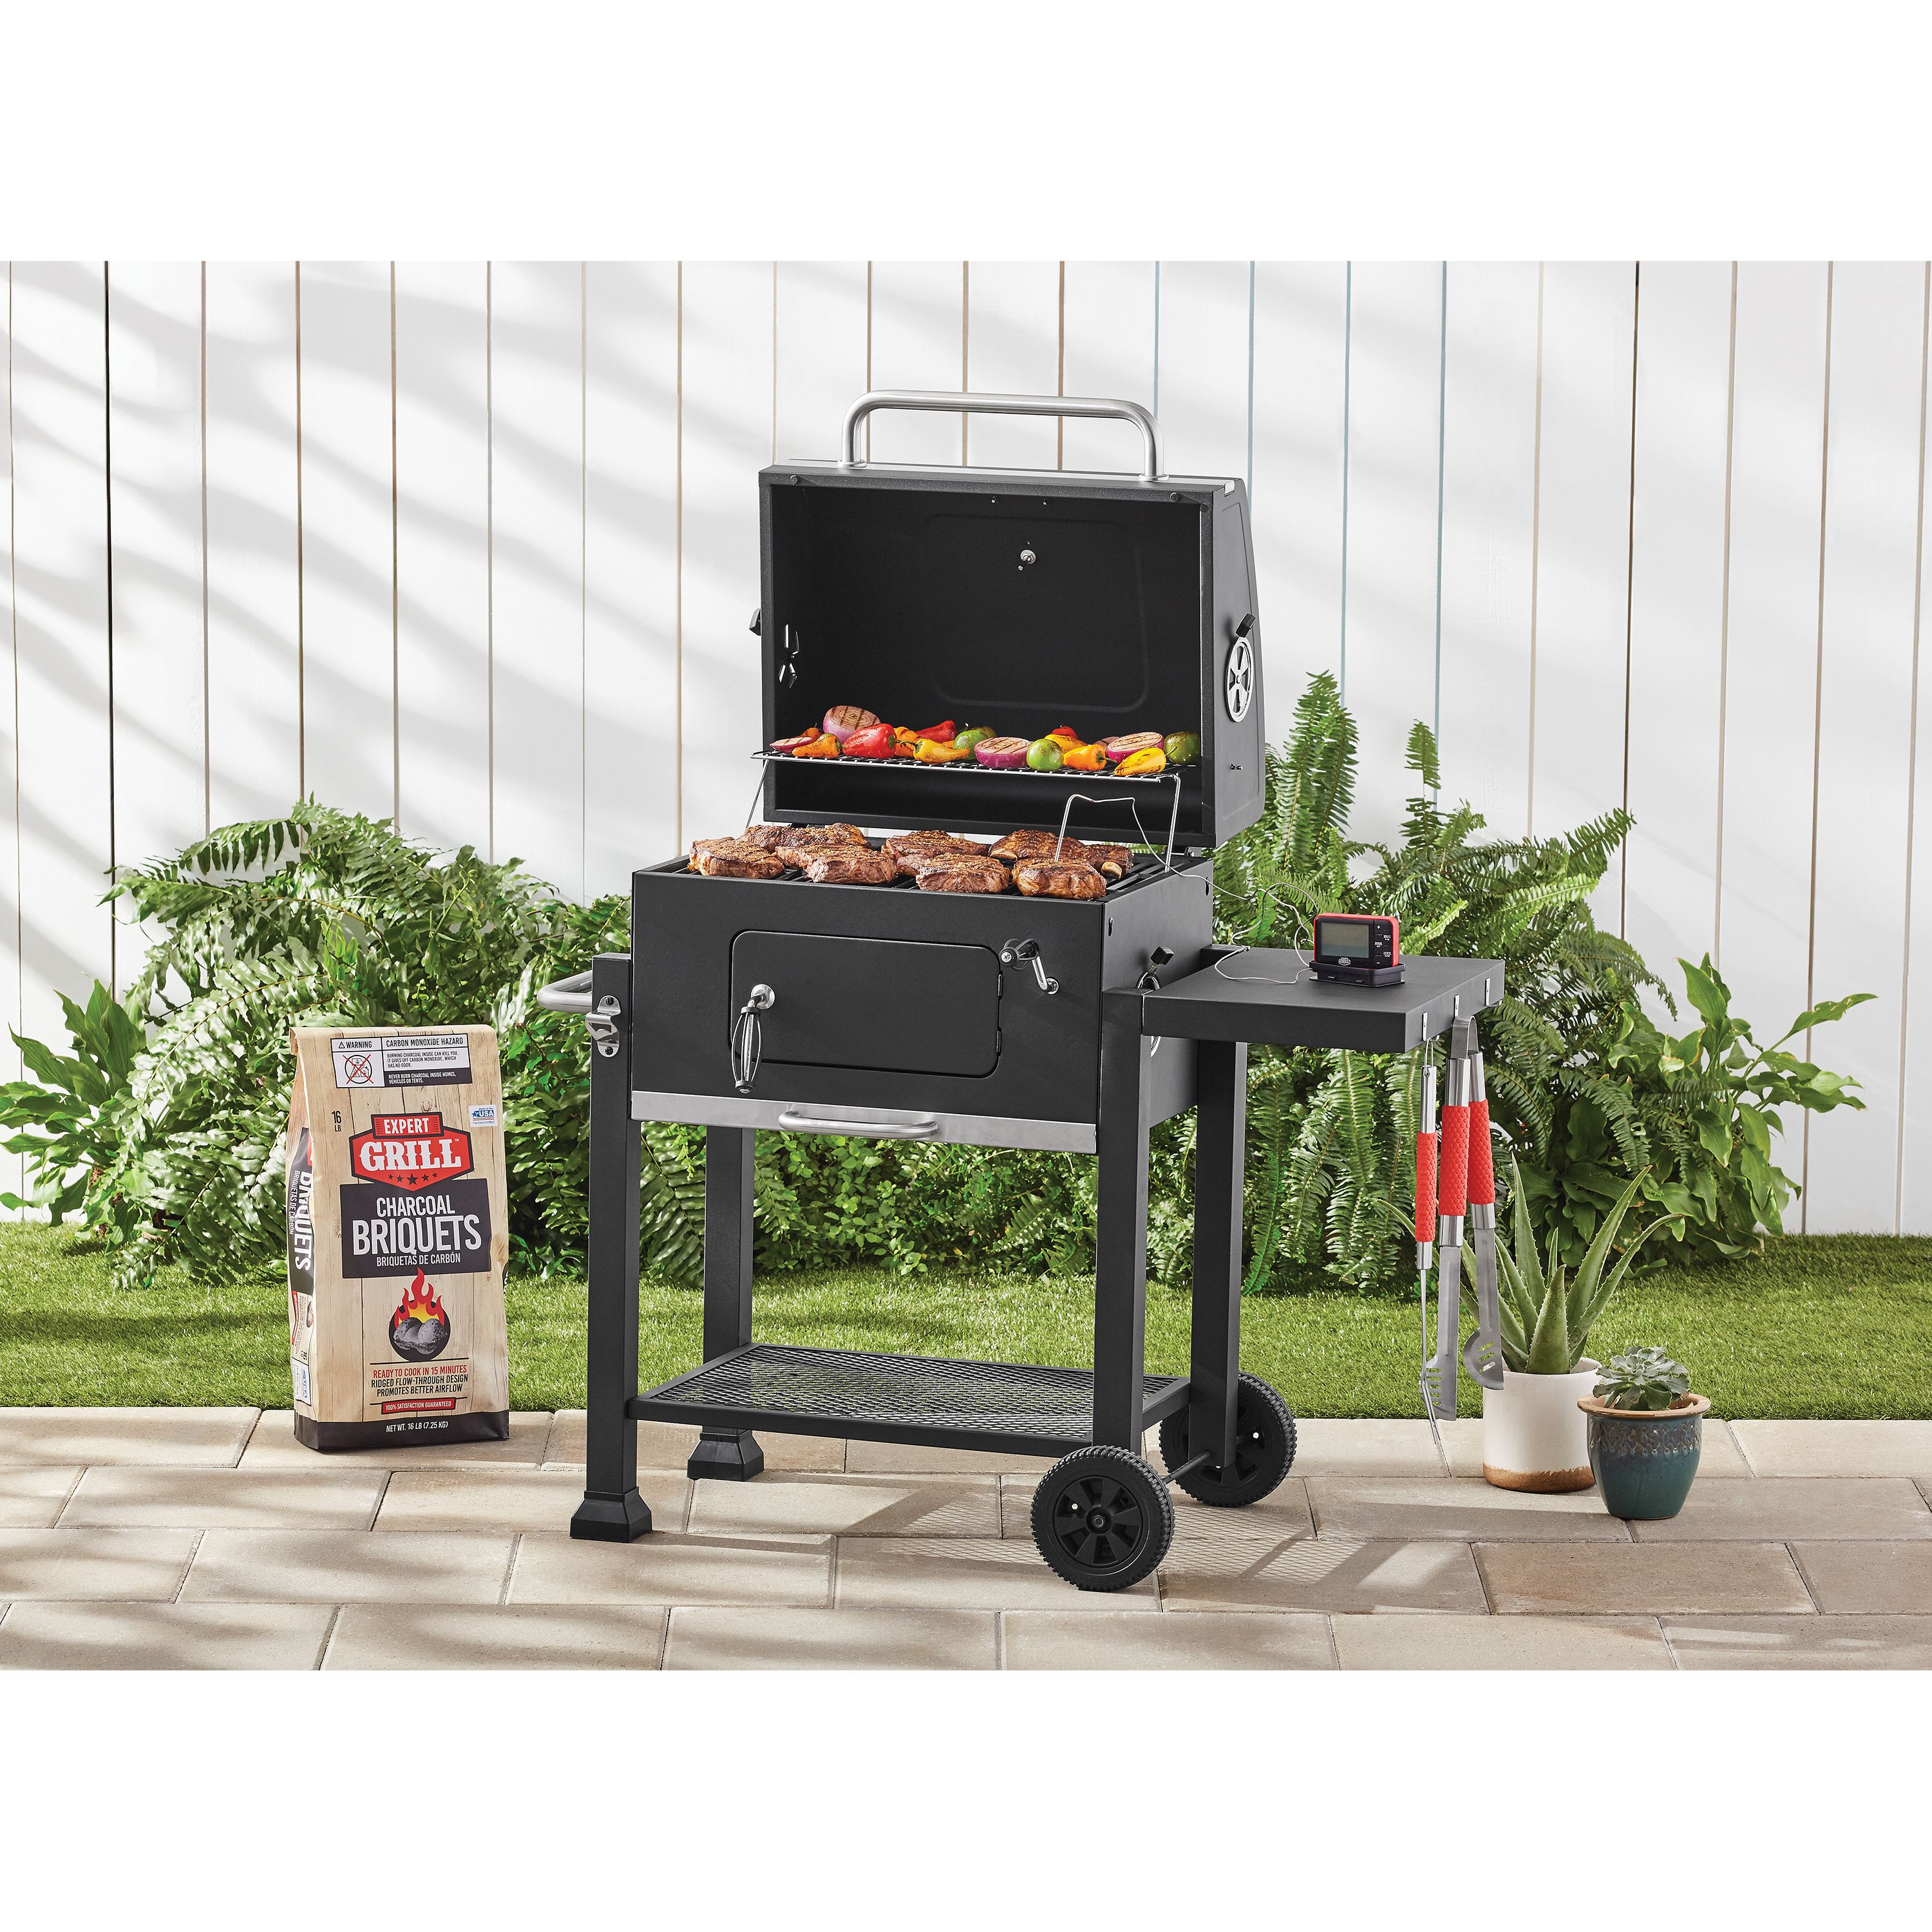 Expert Grill Heavy Duty 24-inch Charcoal Grill, Black - image 4 of 12